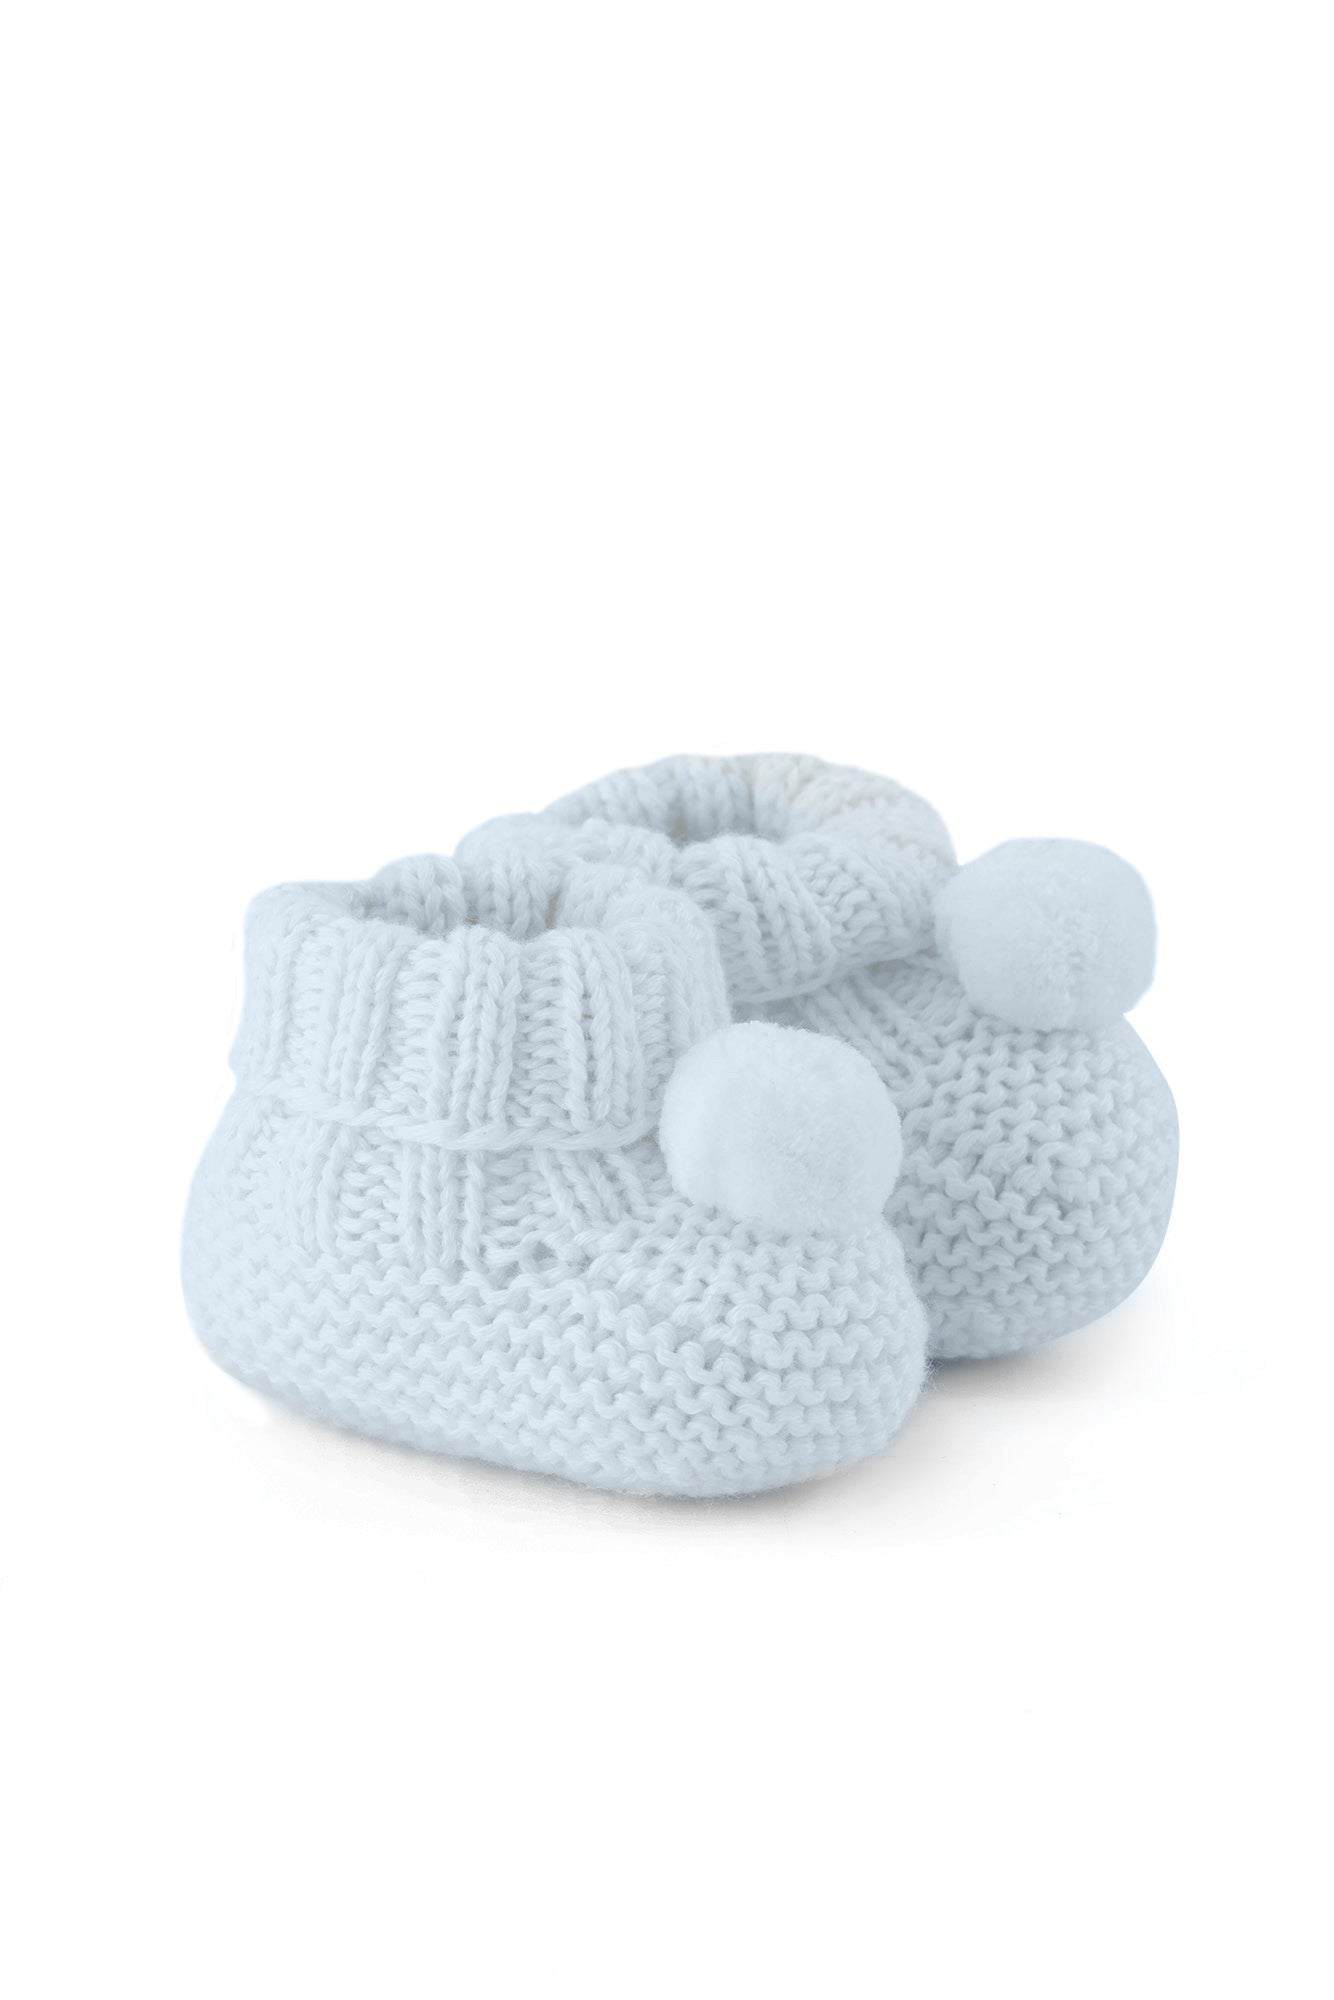 Slippers - Blue knitted Grey Blue / 3M/6M